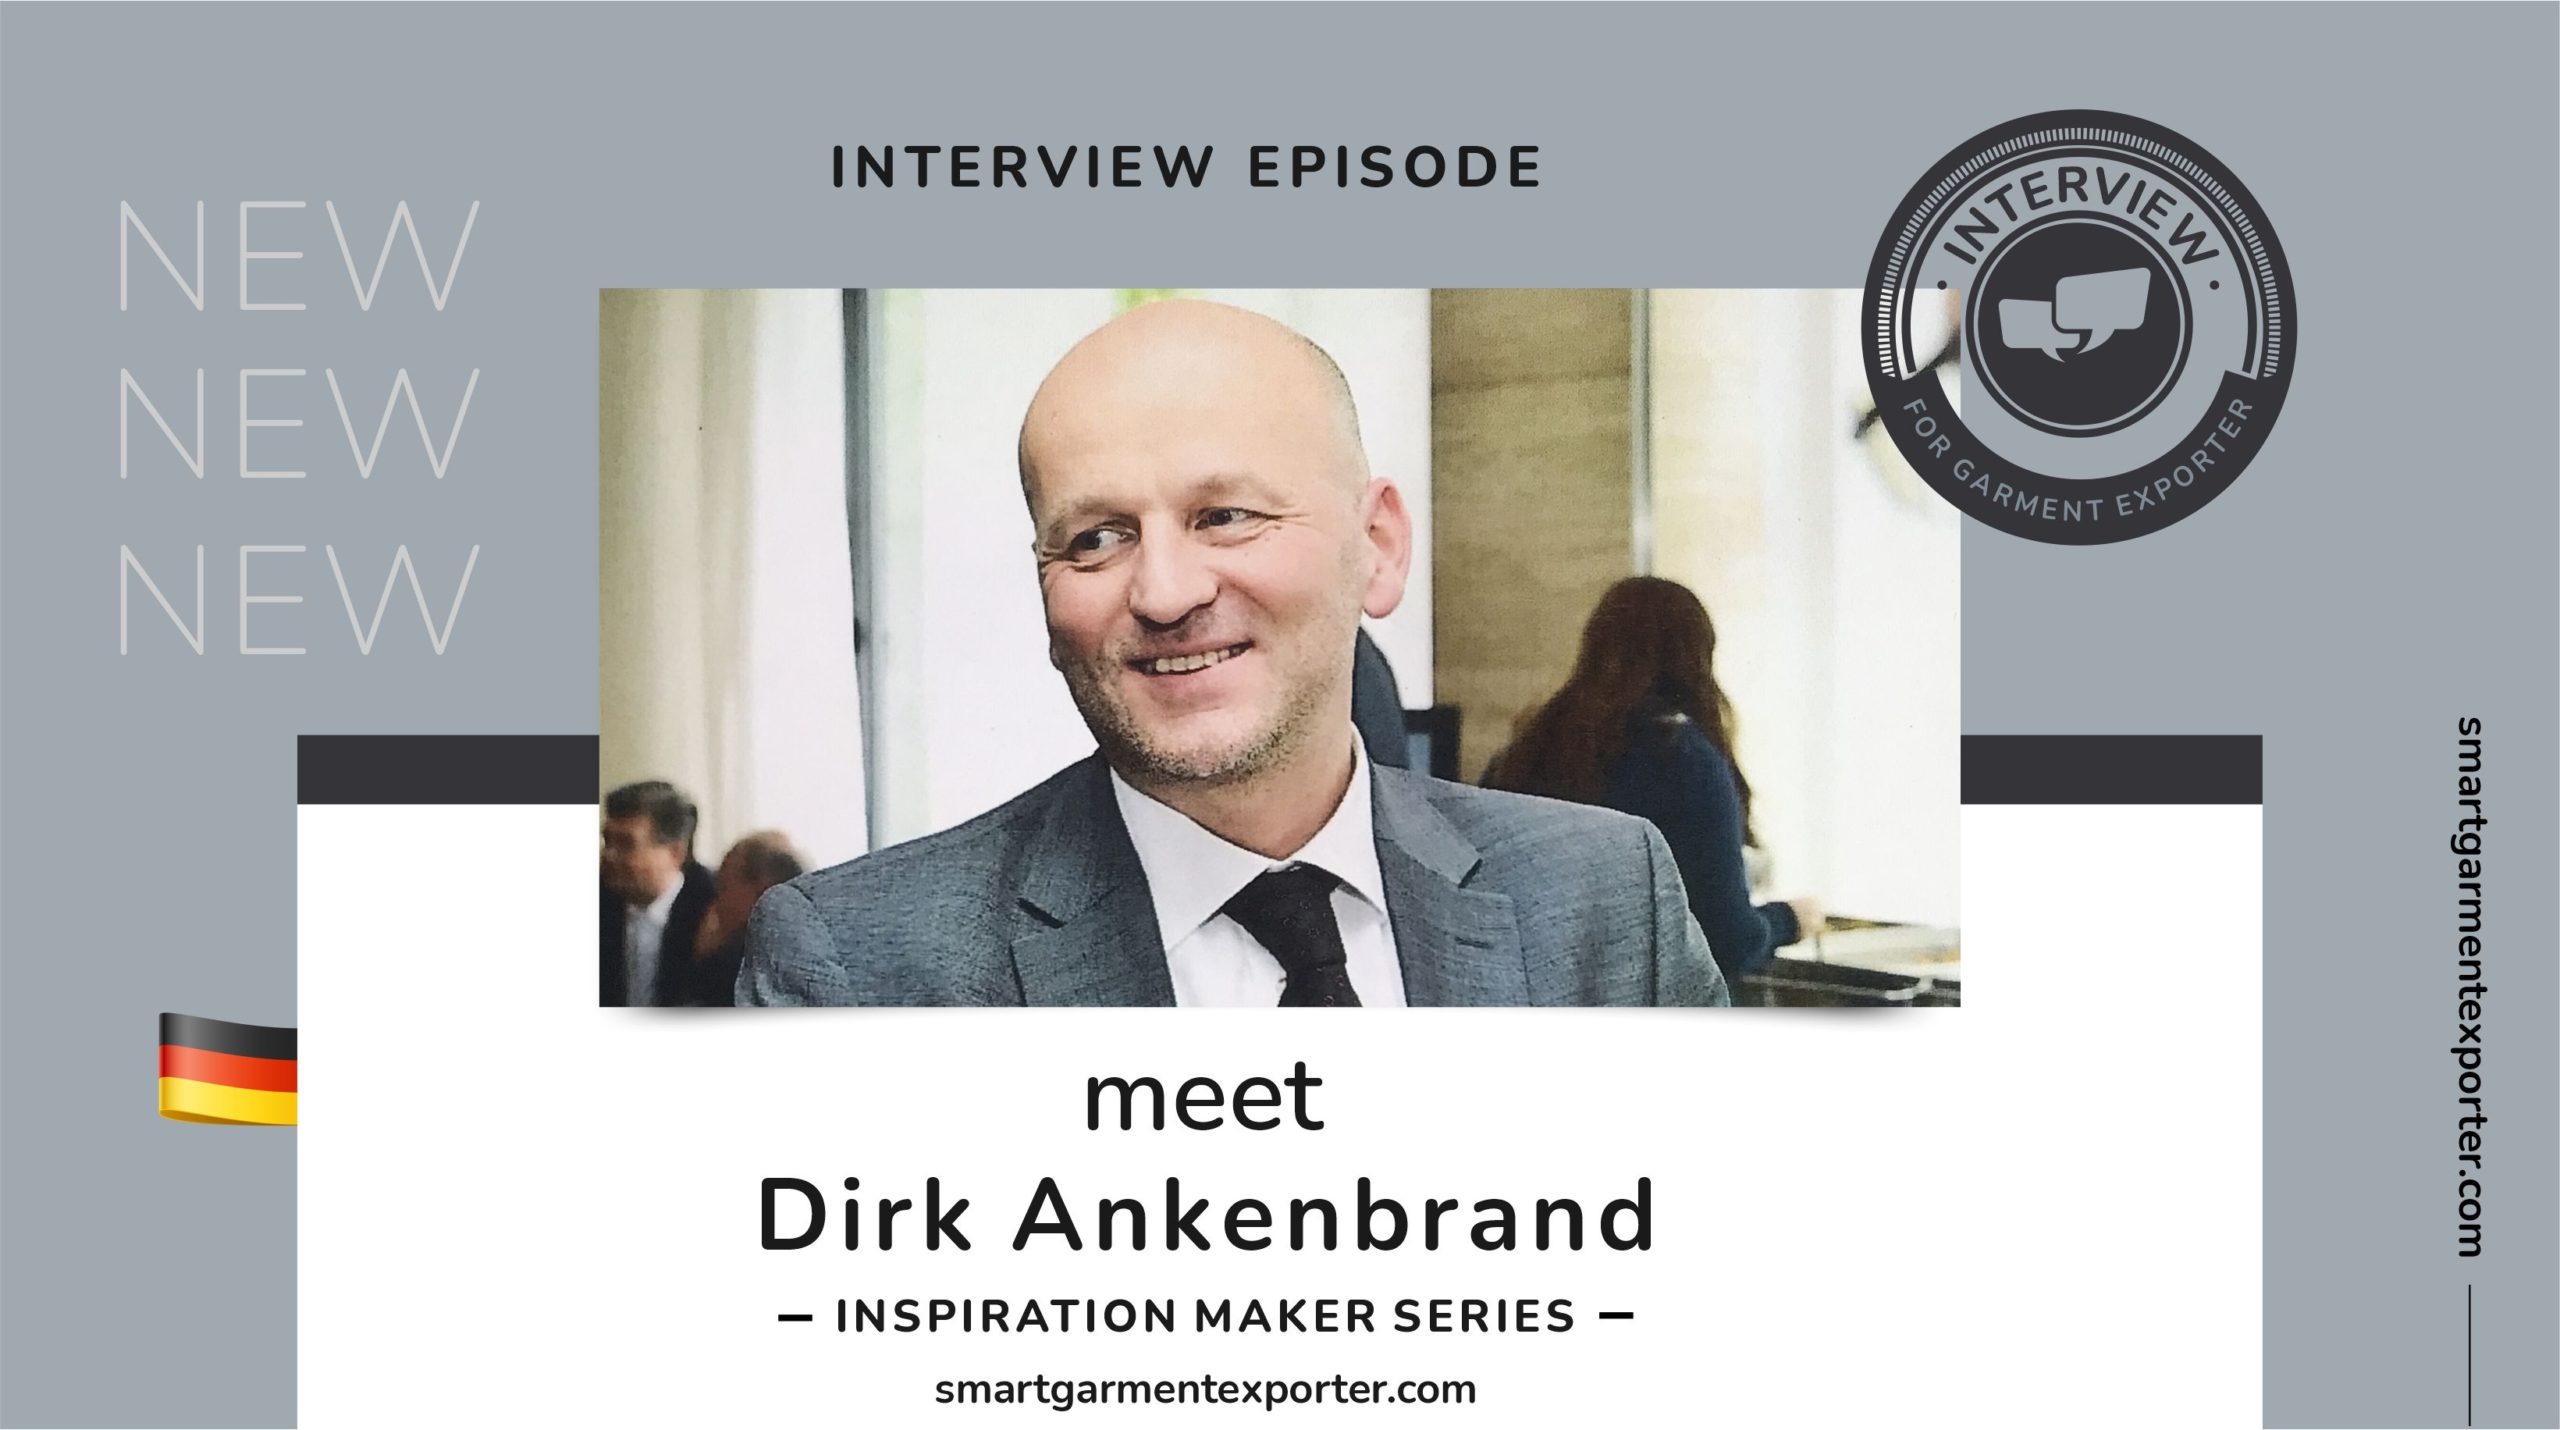 How to earn more by offering less with Dirk Ankenbrand